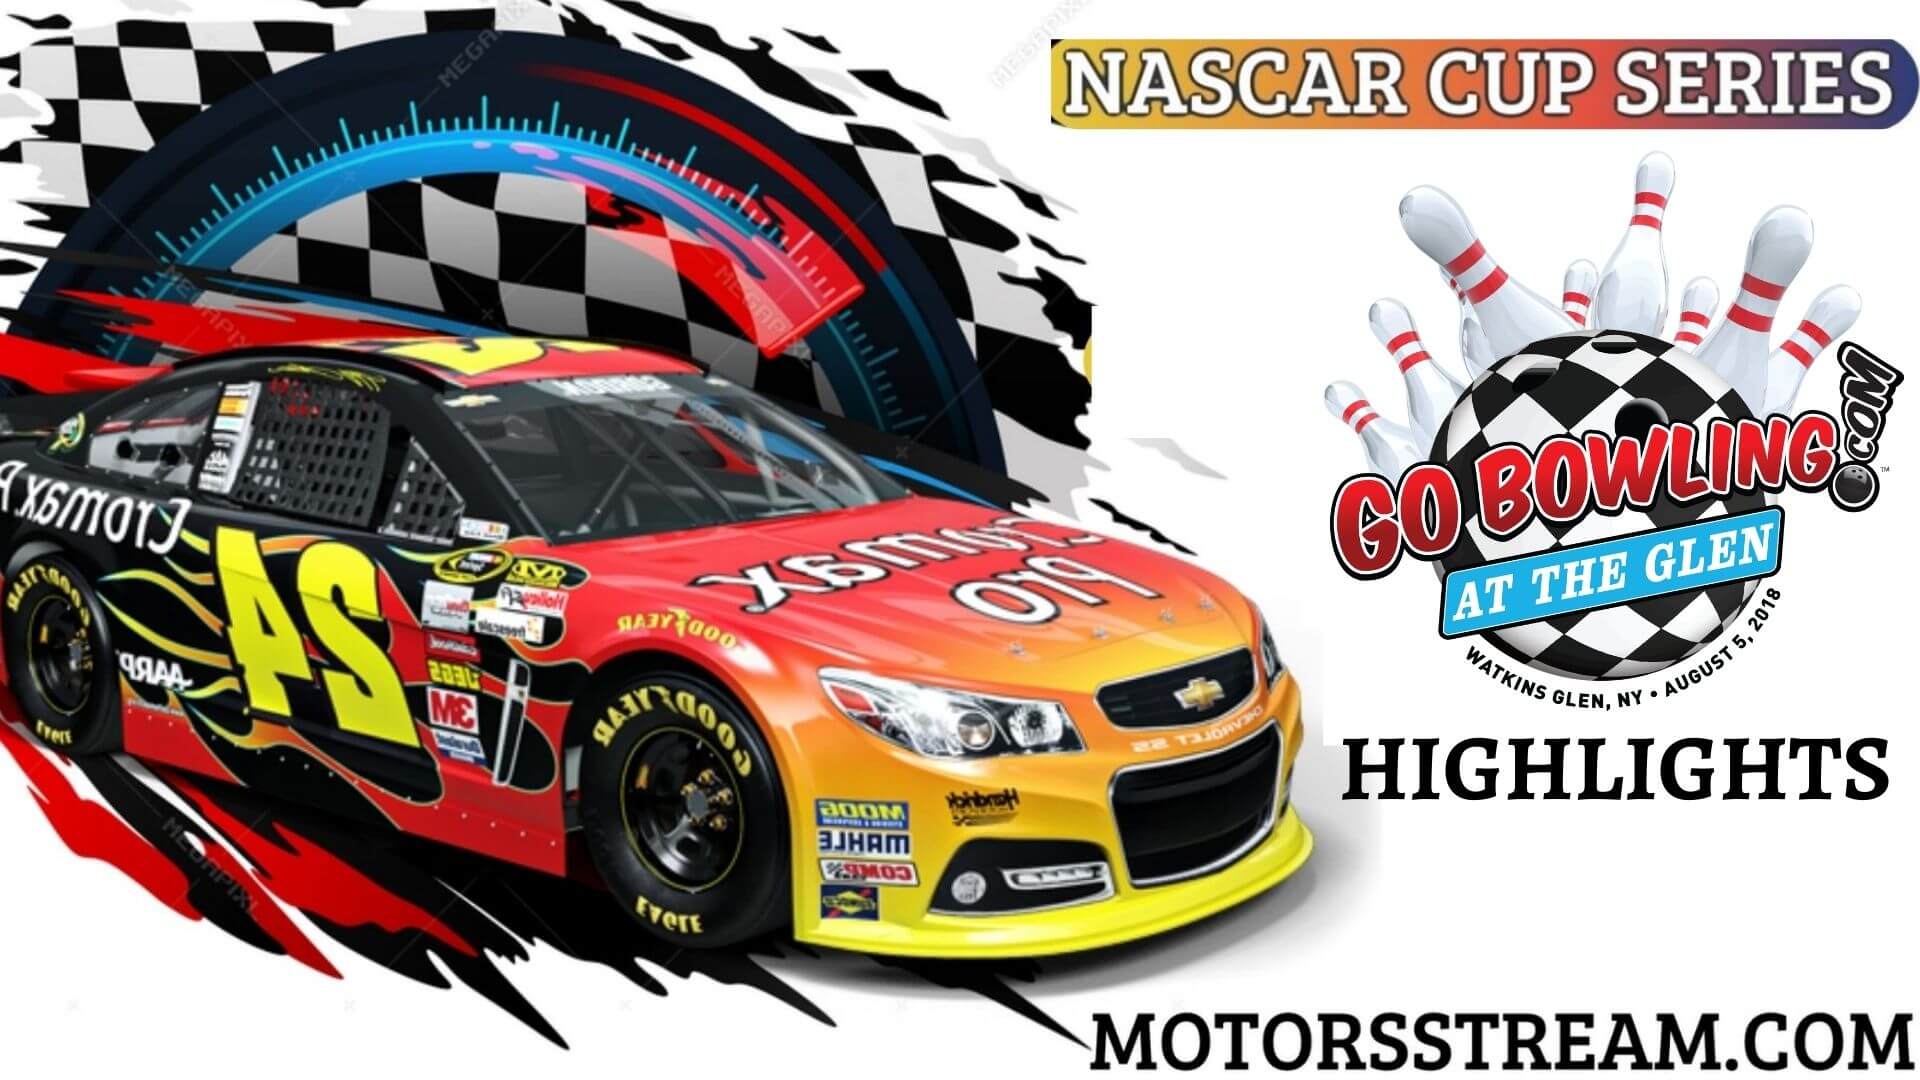 NASCAR Go Bowling At The Glen Highlights 2021 Cup Series